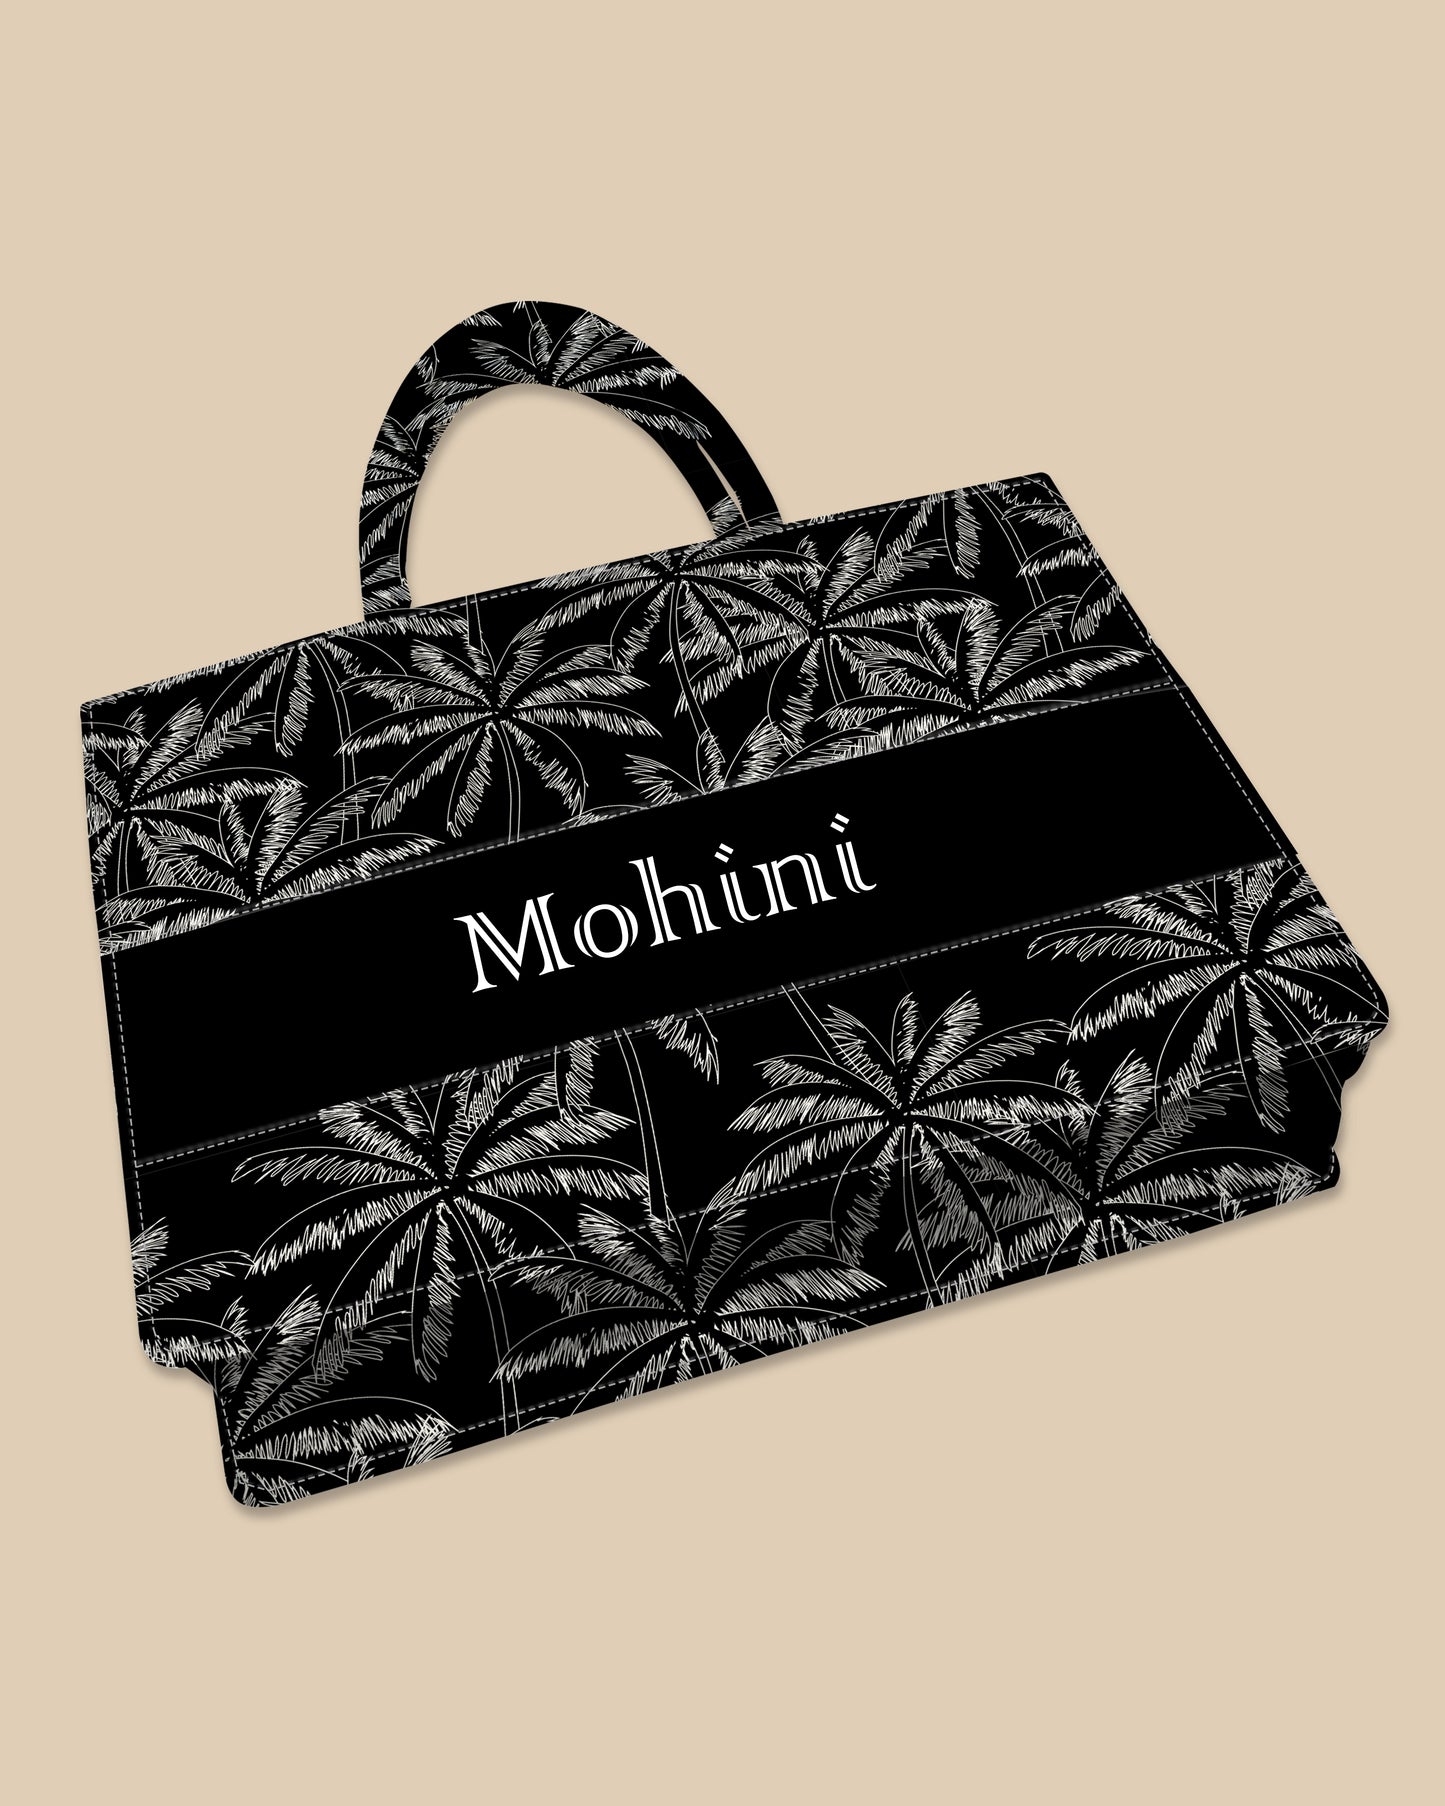 Customized Tote Bag Designed With Hand Drawn White Outline Palm Trees Pattern